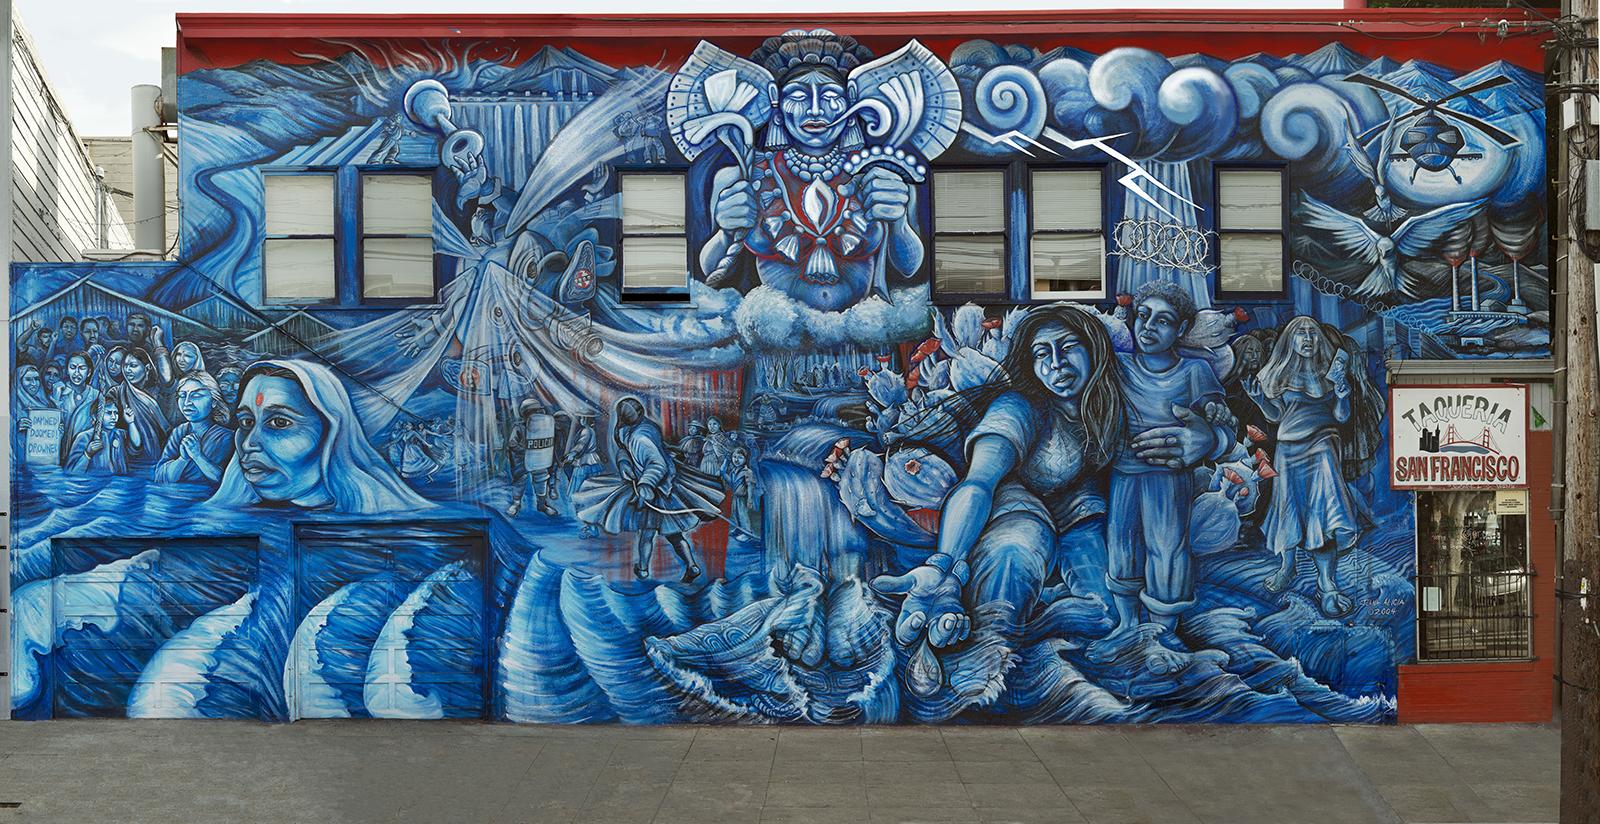 A mural is painted in primarily reds and blues depicting women and resistance.